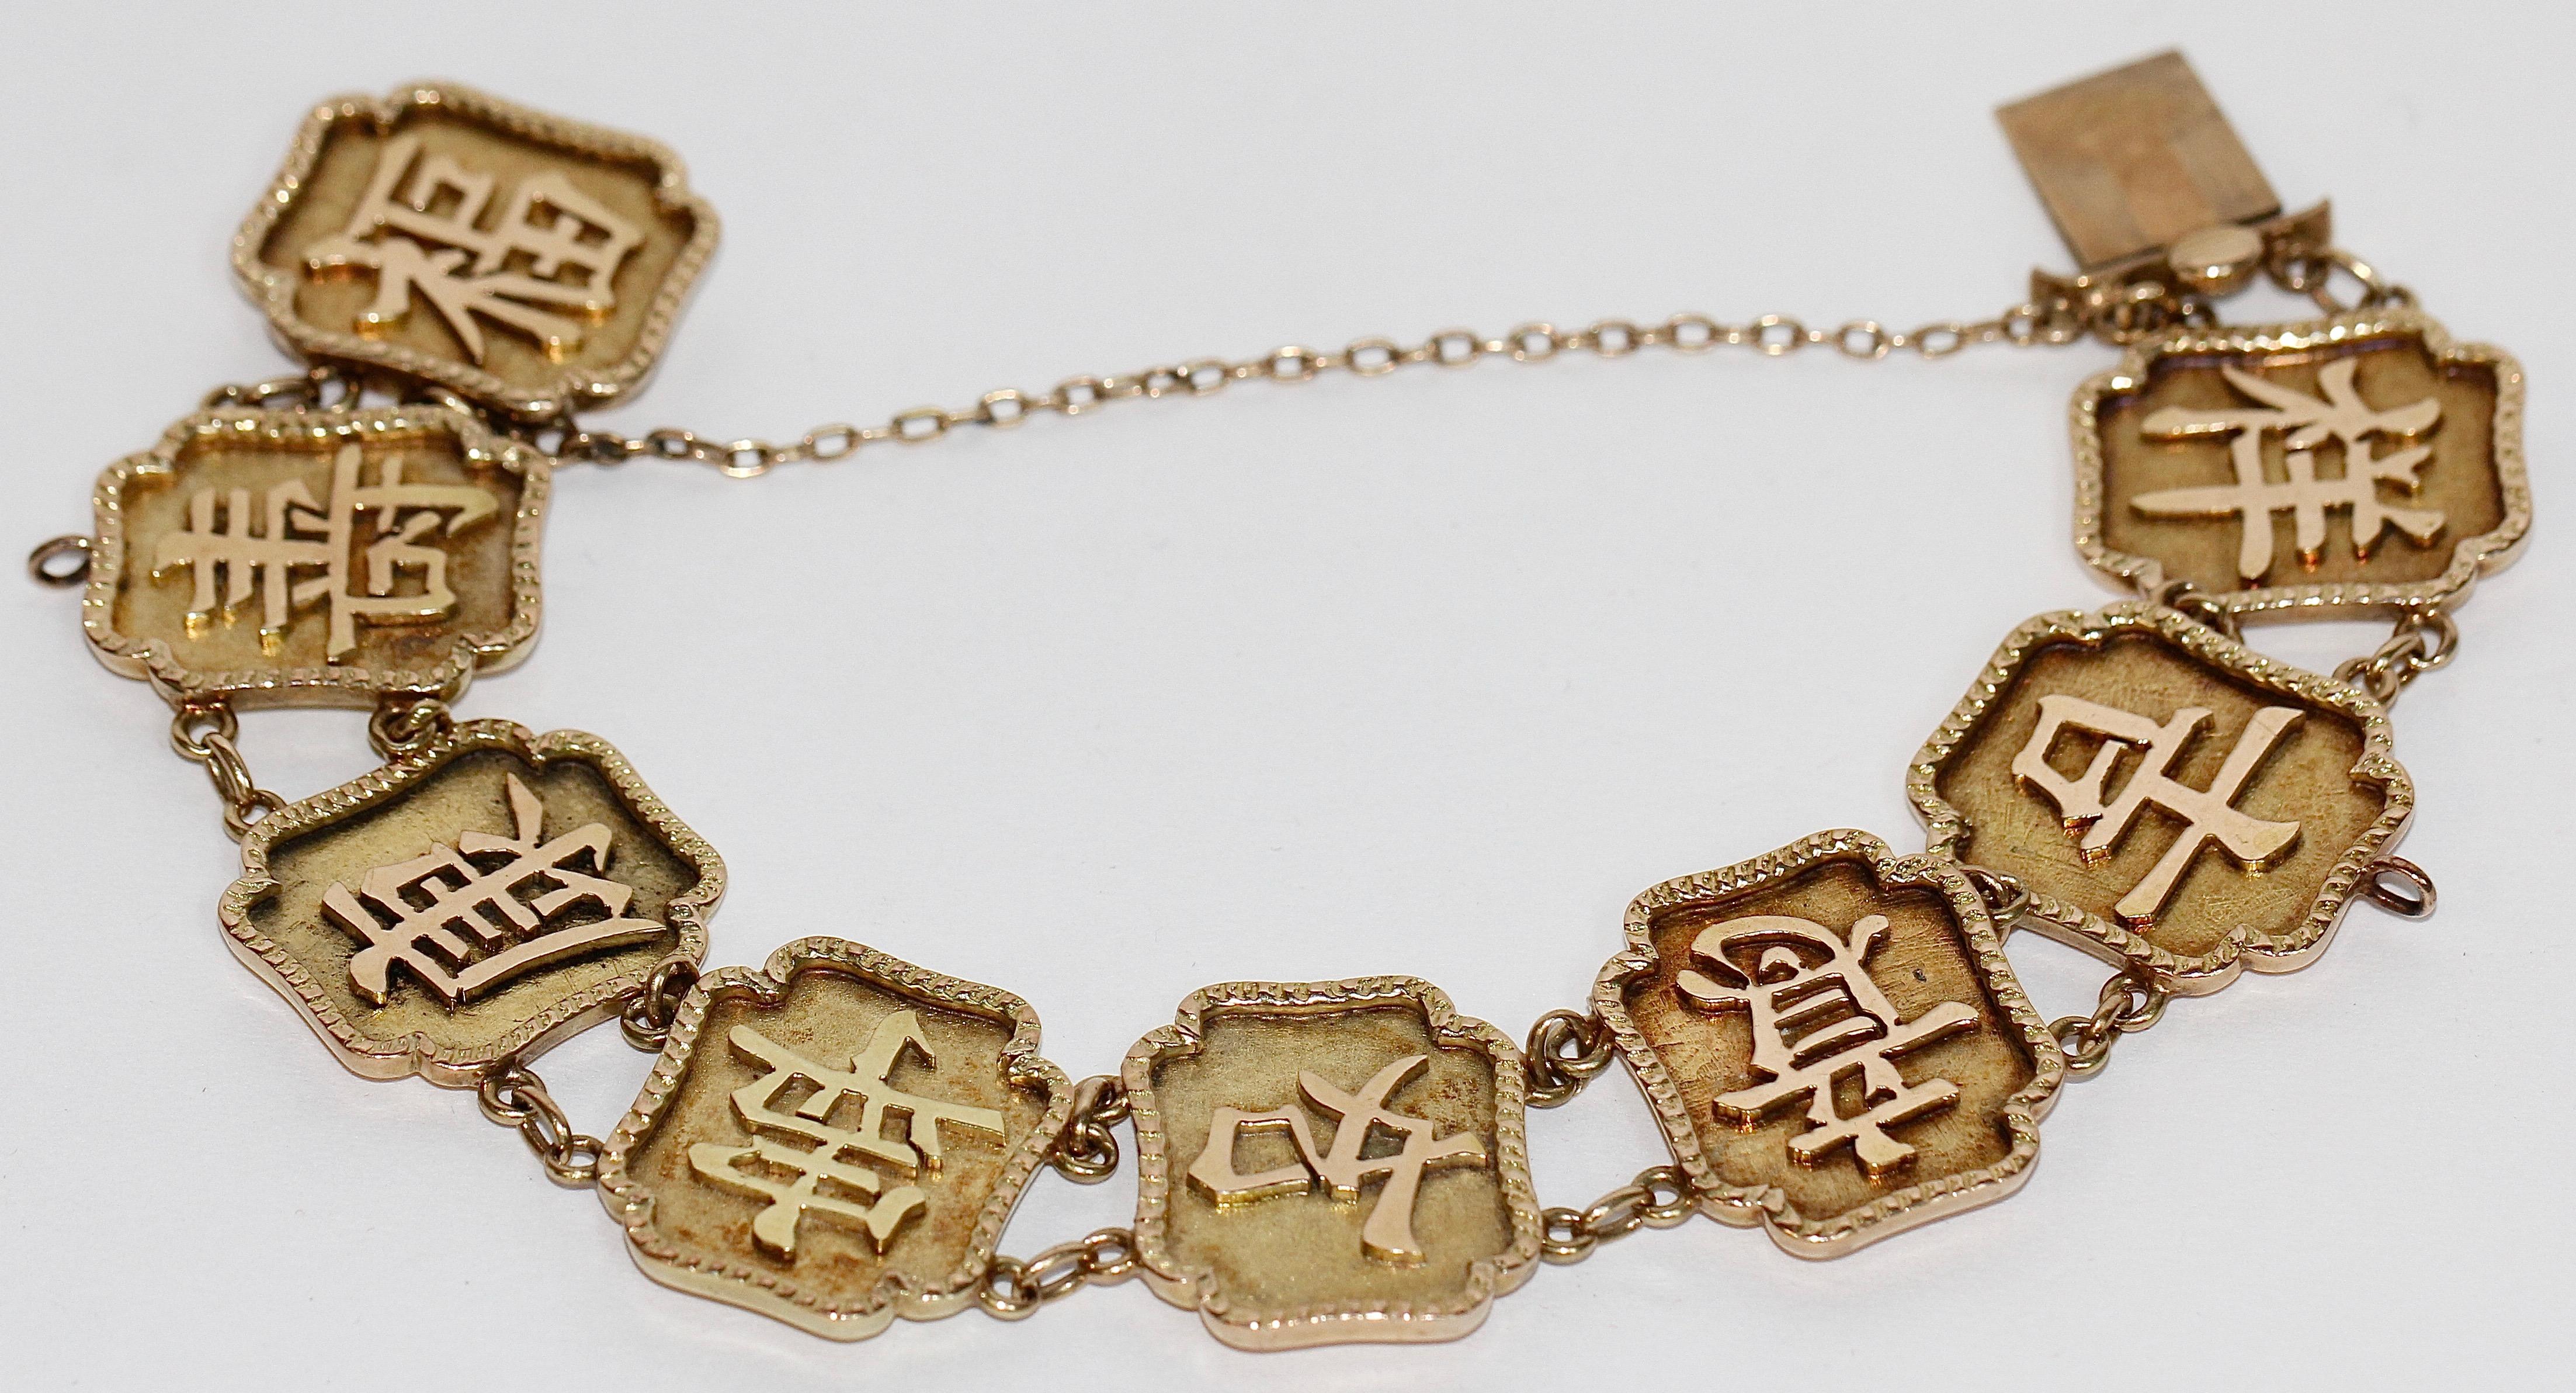 Antique 14 karat Chinese gold bracelet with writings - inscriptions - wisdoms.

High quality goldsmith work.